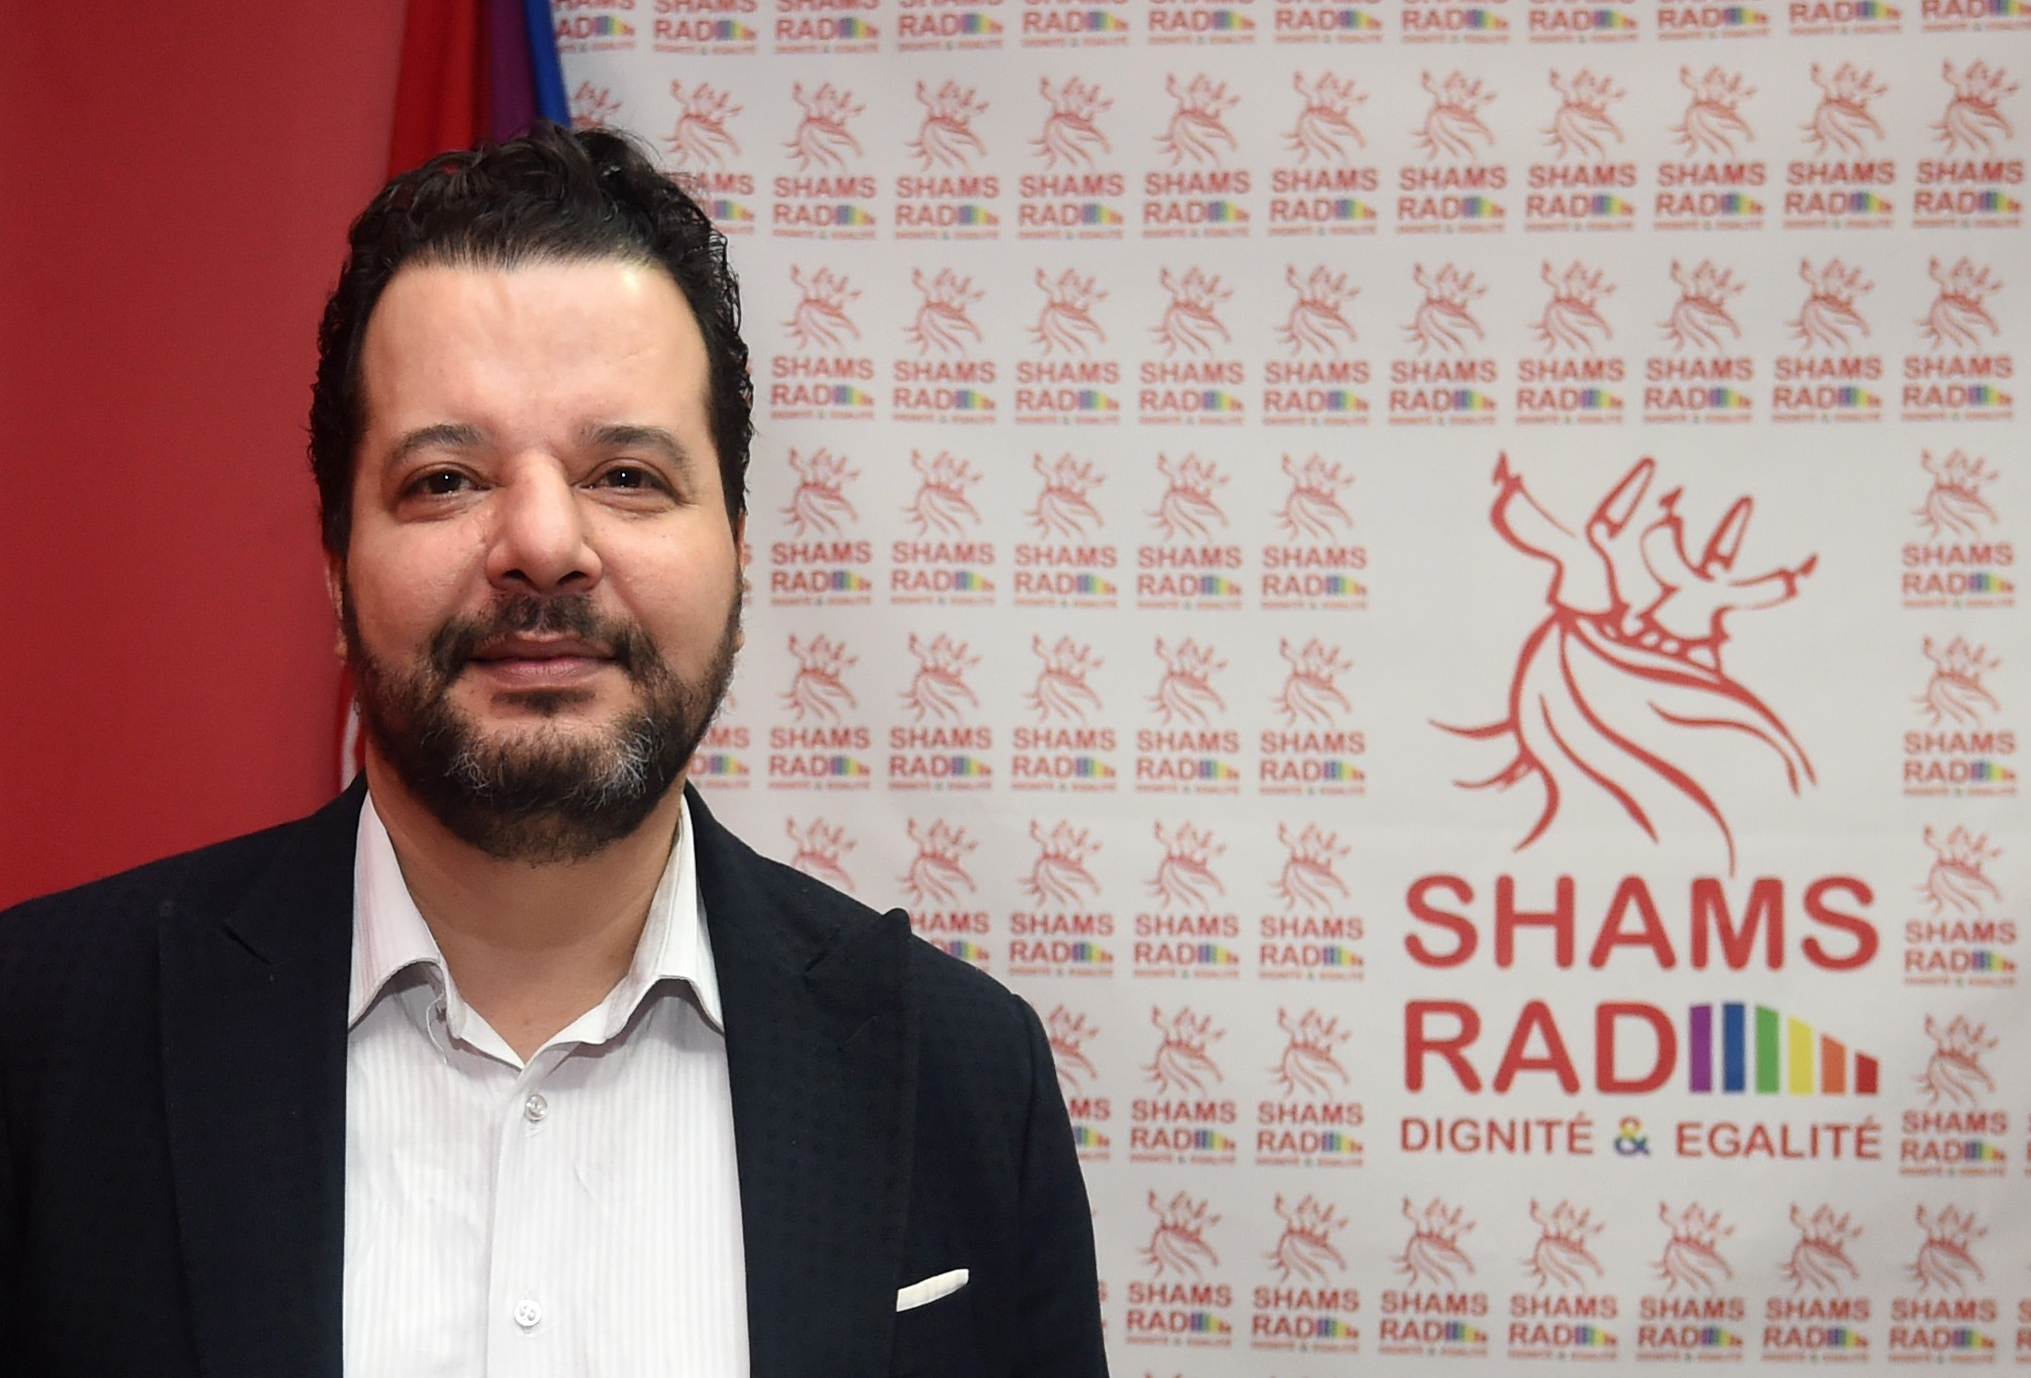 Tunisian lawyer Mounir Baatour, president of Association Shams, which supports the depenalization of homosexuality in Tunisia